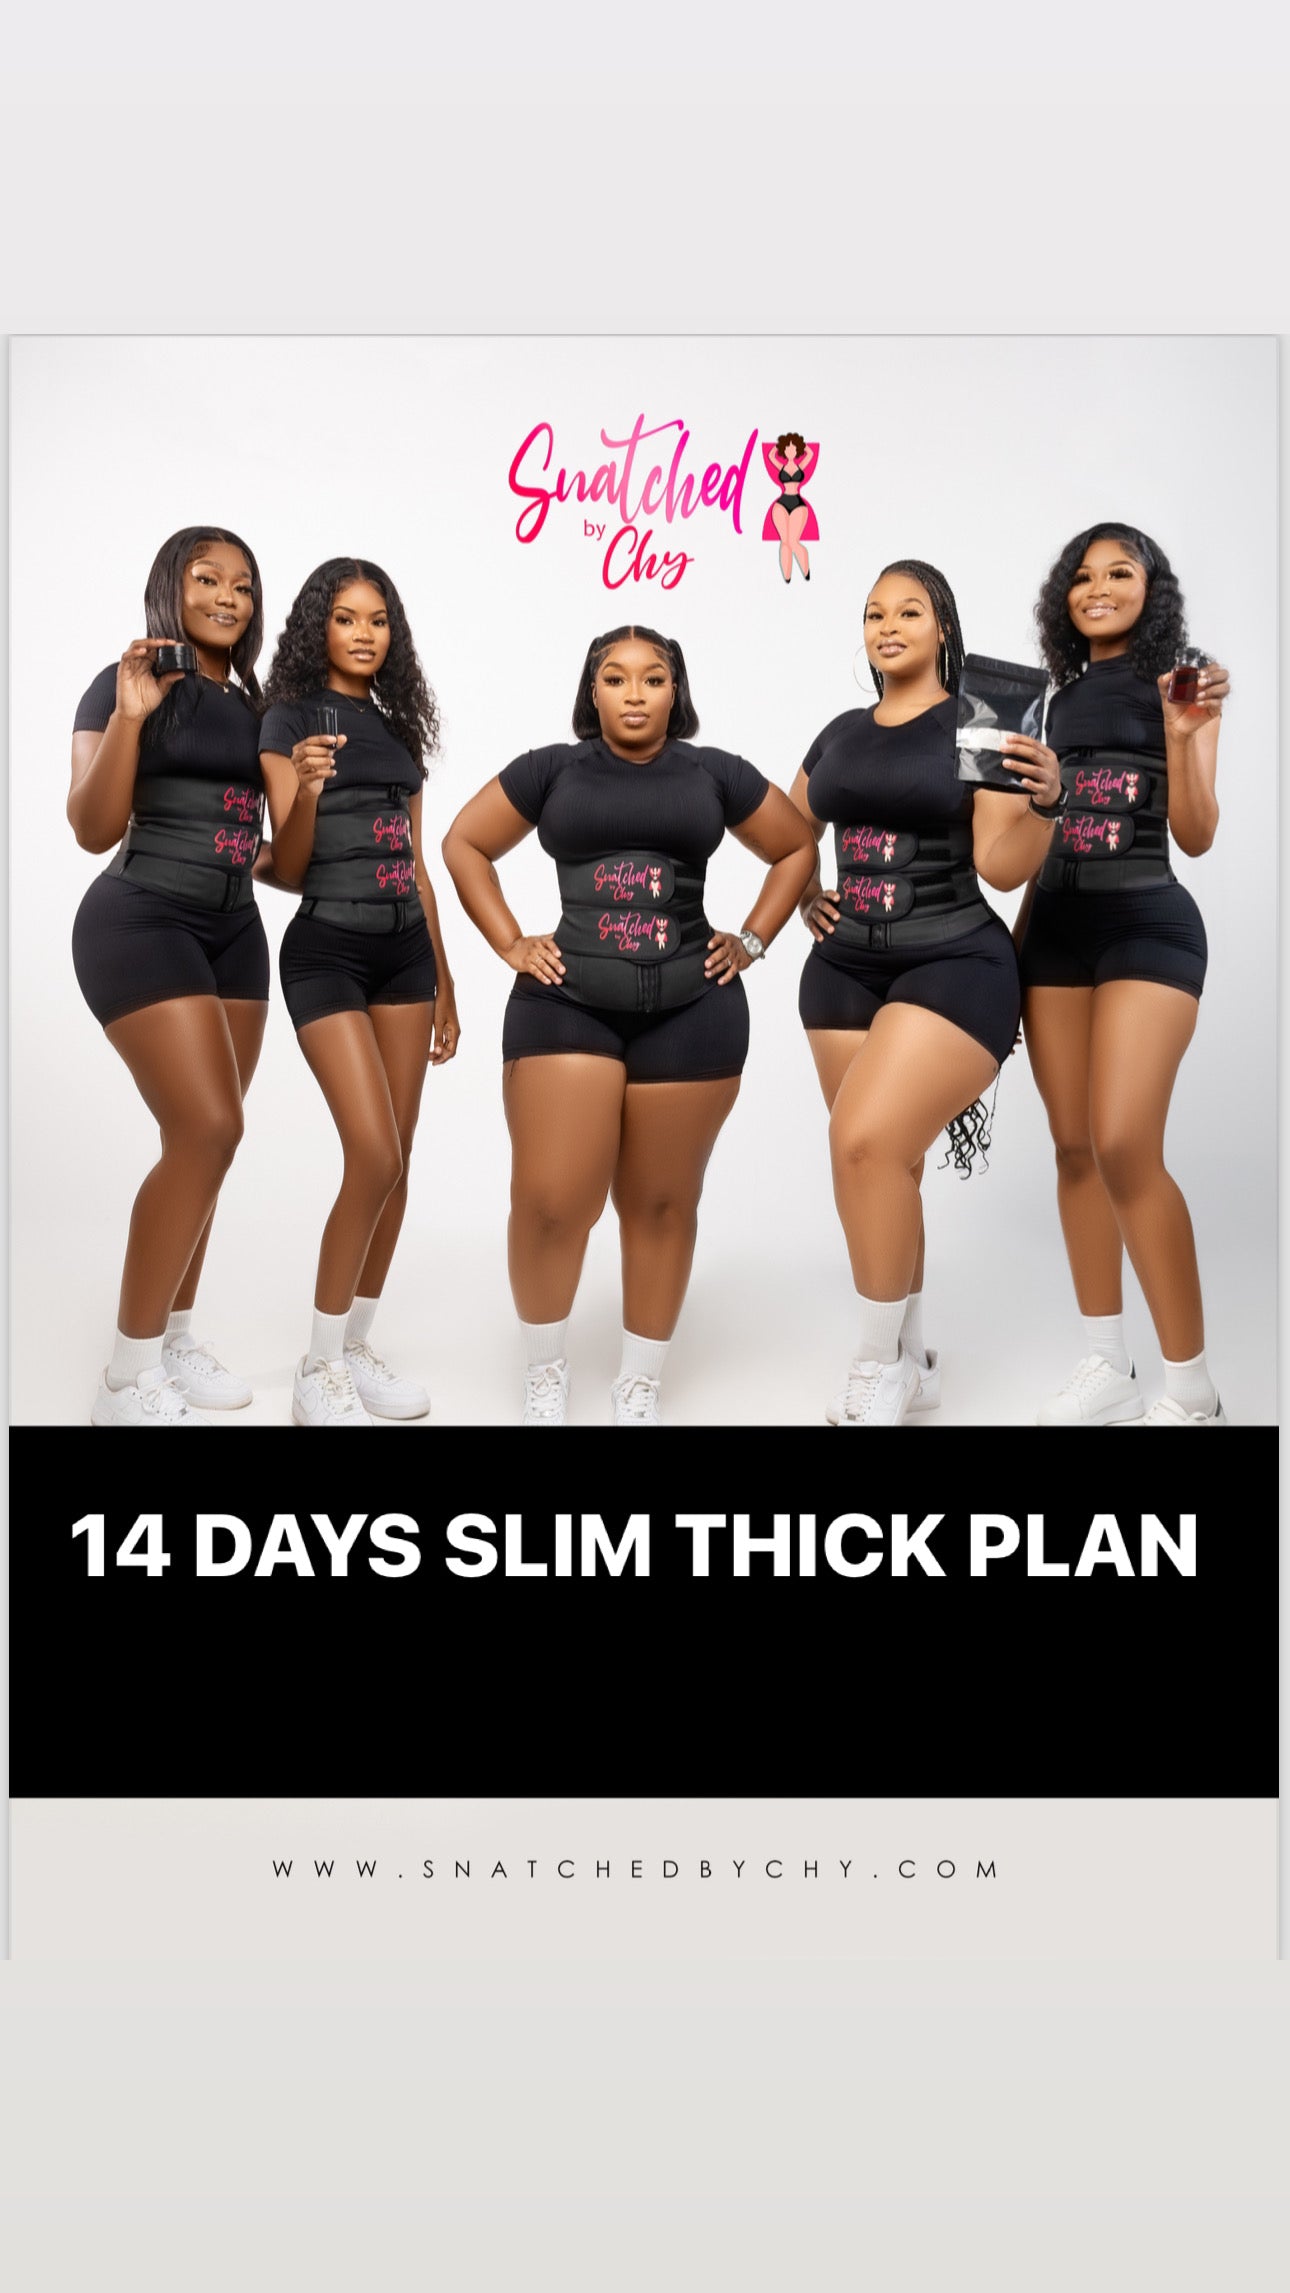 The Slim Thick Nutrition Guide - Snatched body